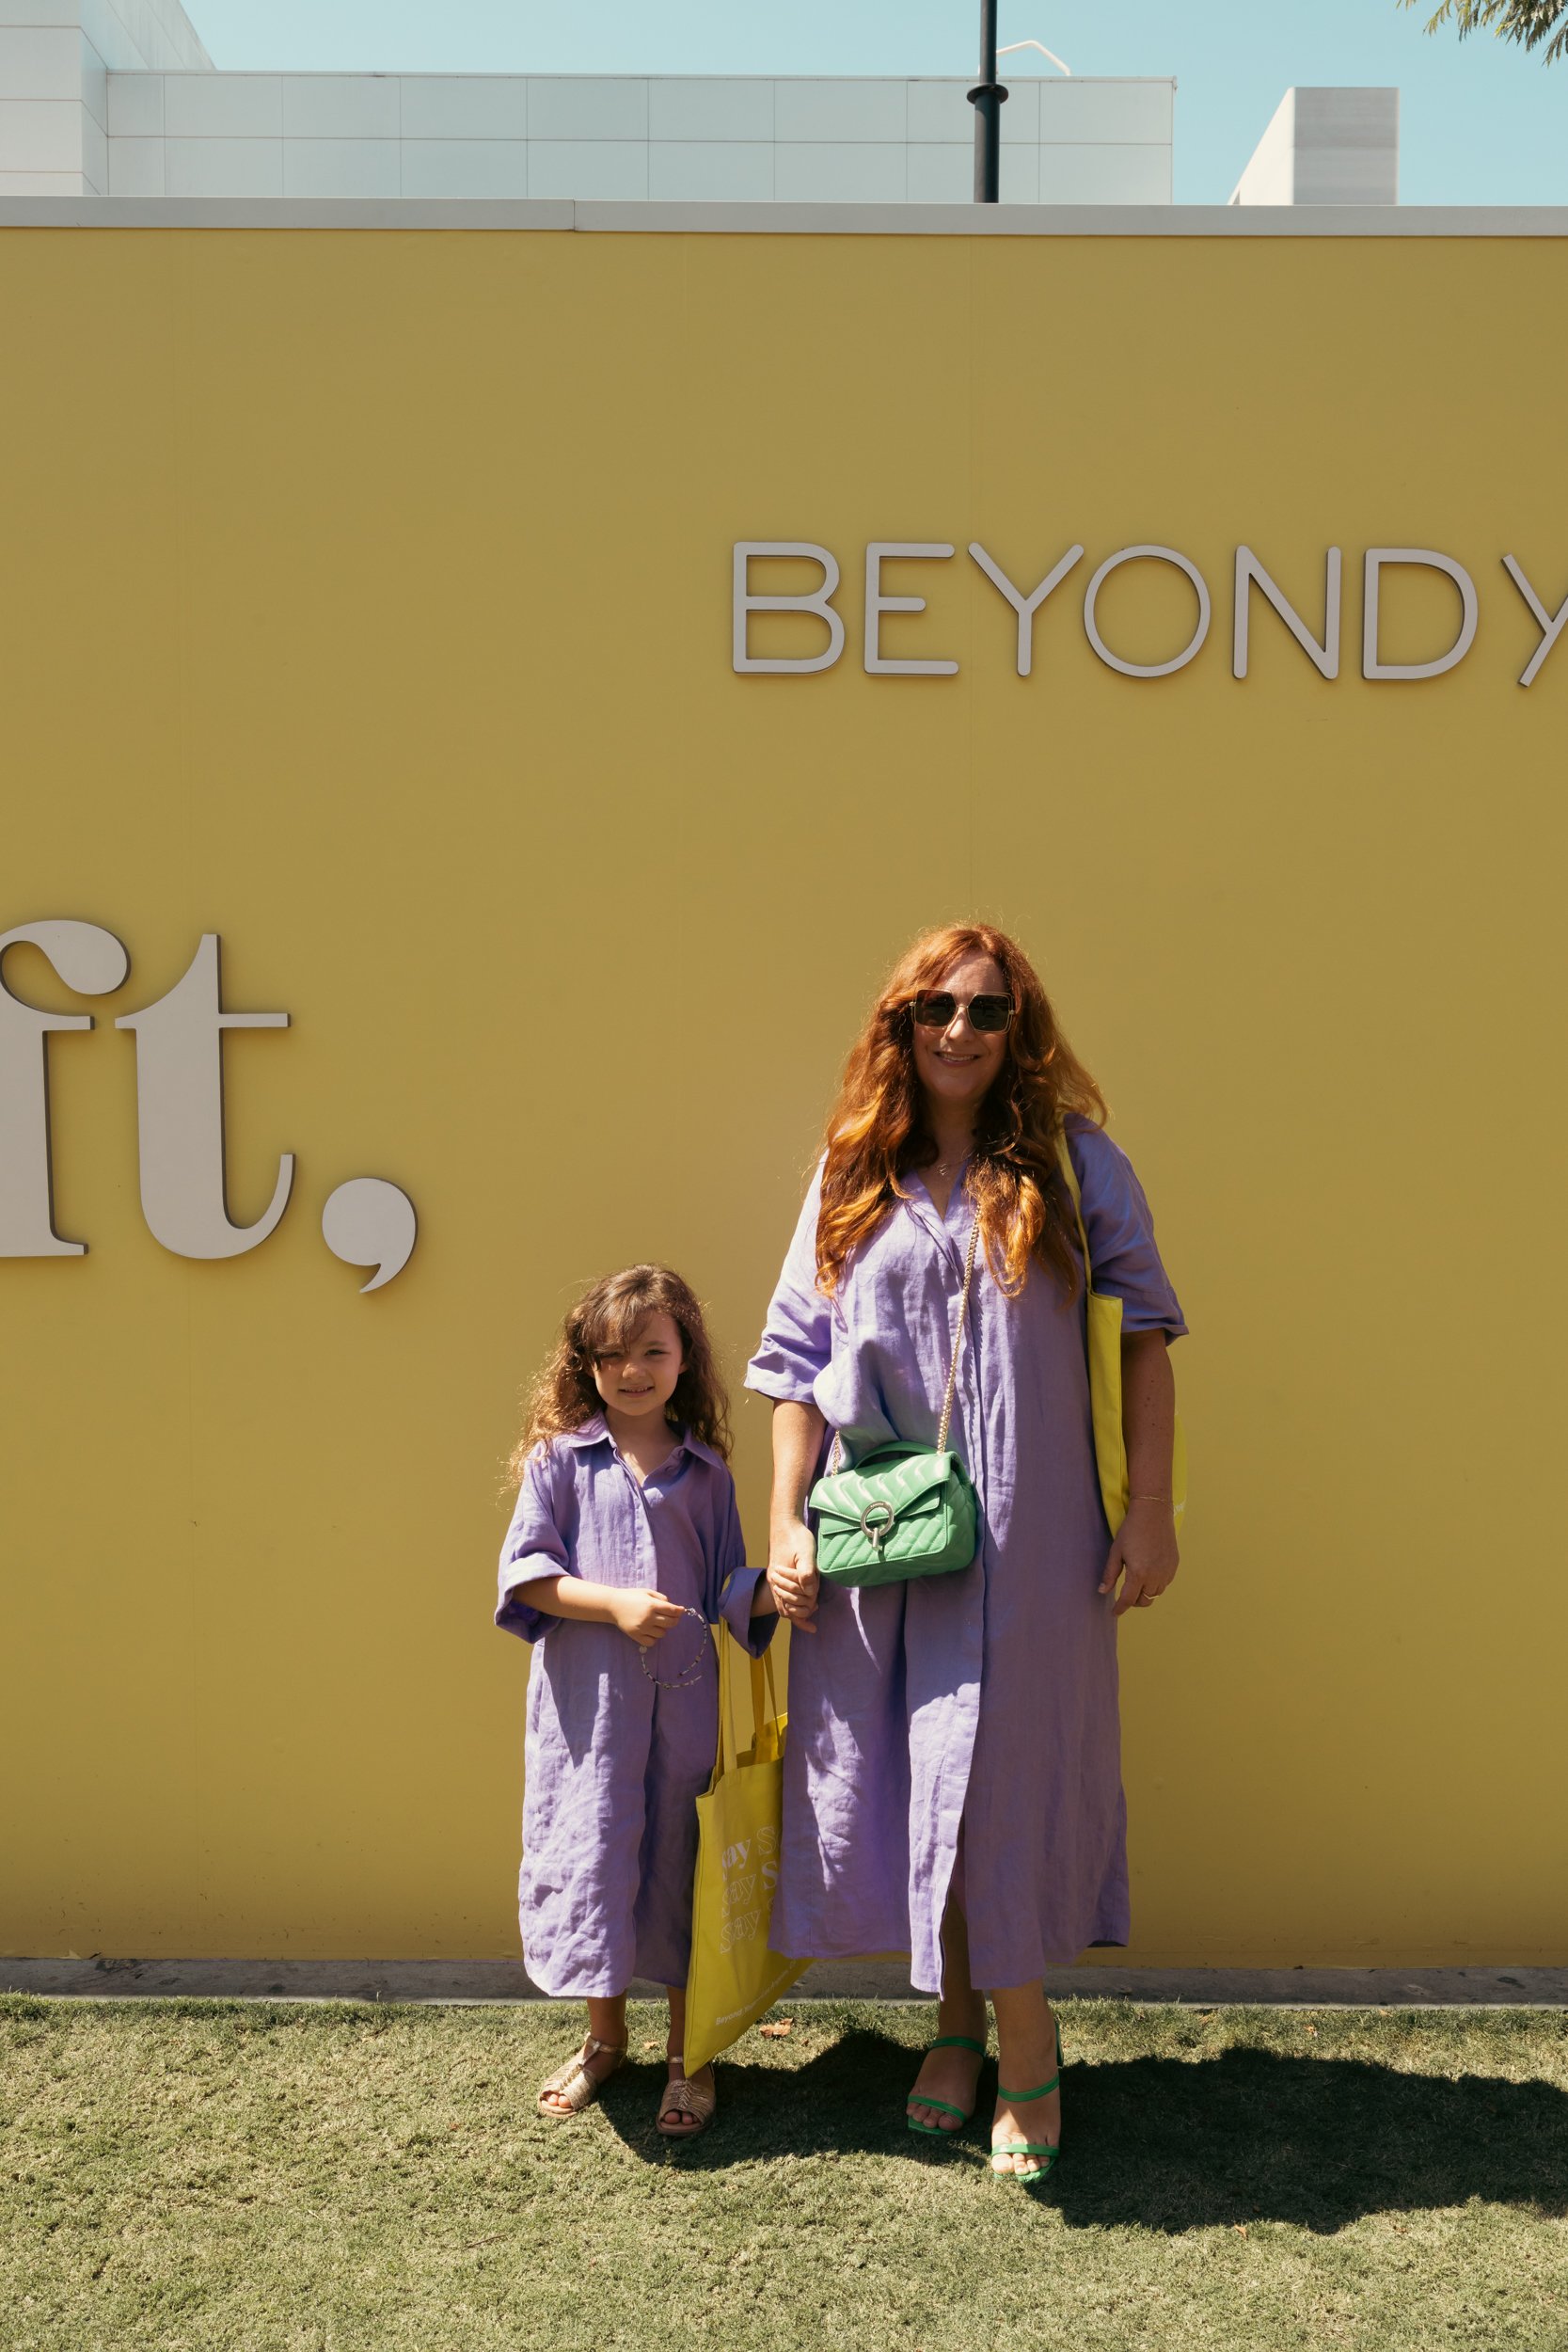 Photos! Celebrating Beyond Yoga's Pop-Up in Los Angeles — FASHION MAMAS®